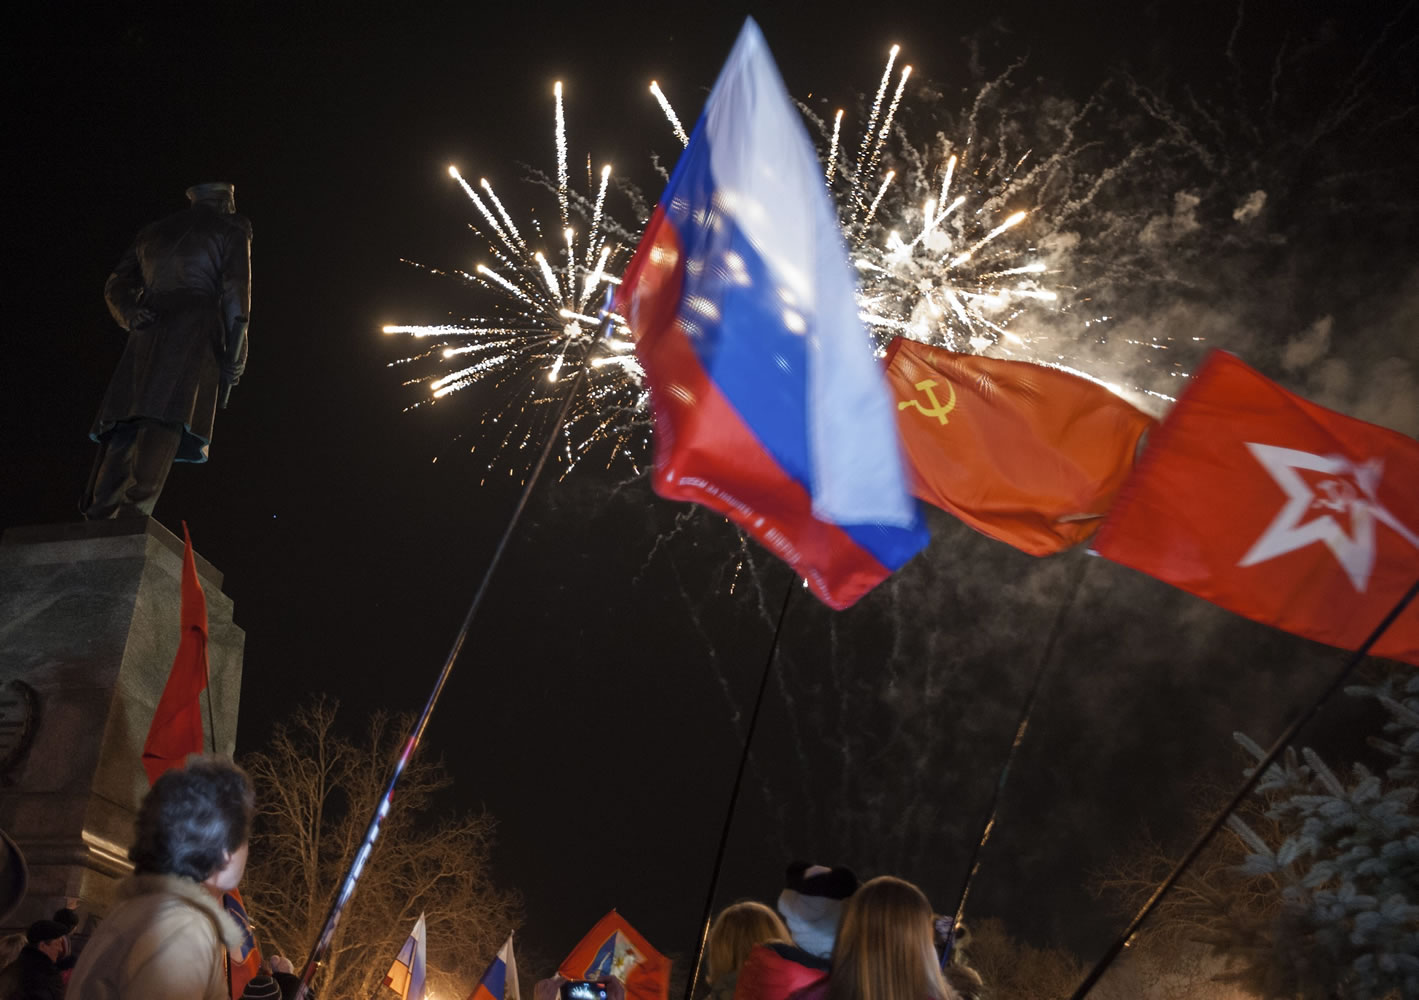 People watch fireworks at the central Nakhimov Square in Sevastopol, Crimea, on Friday.